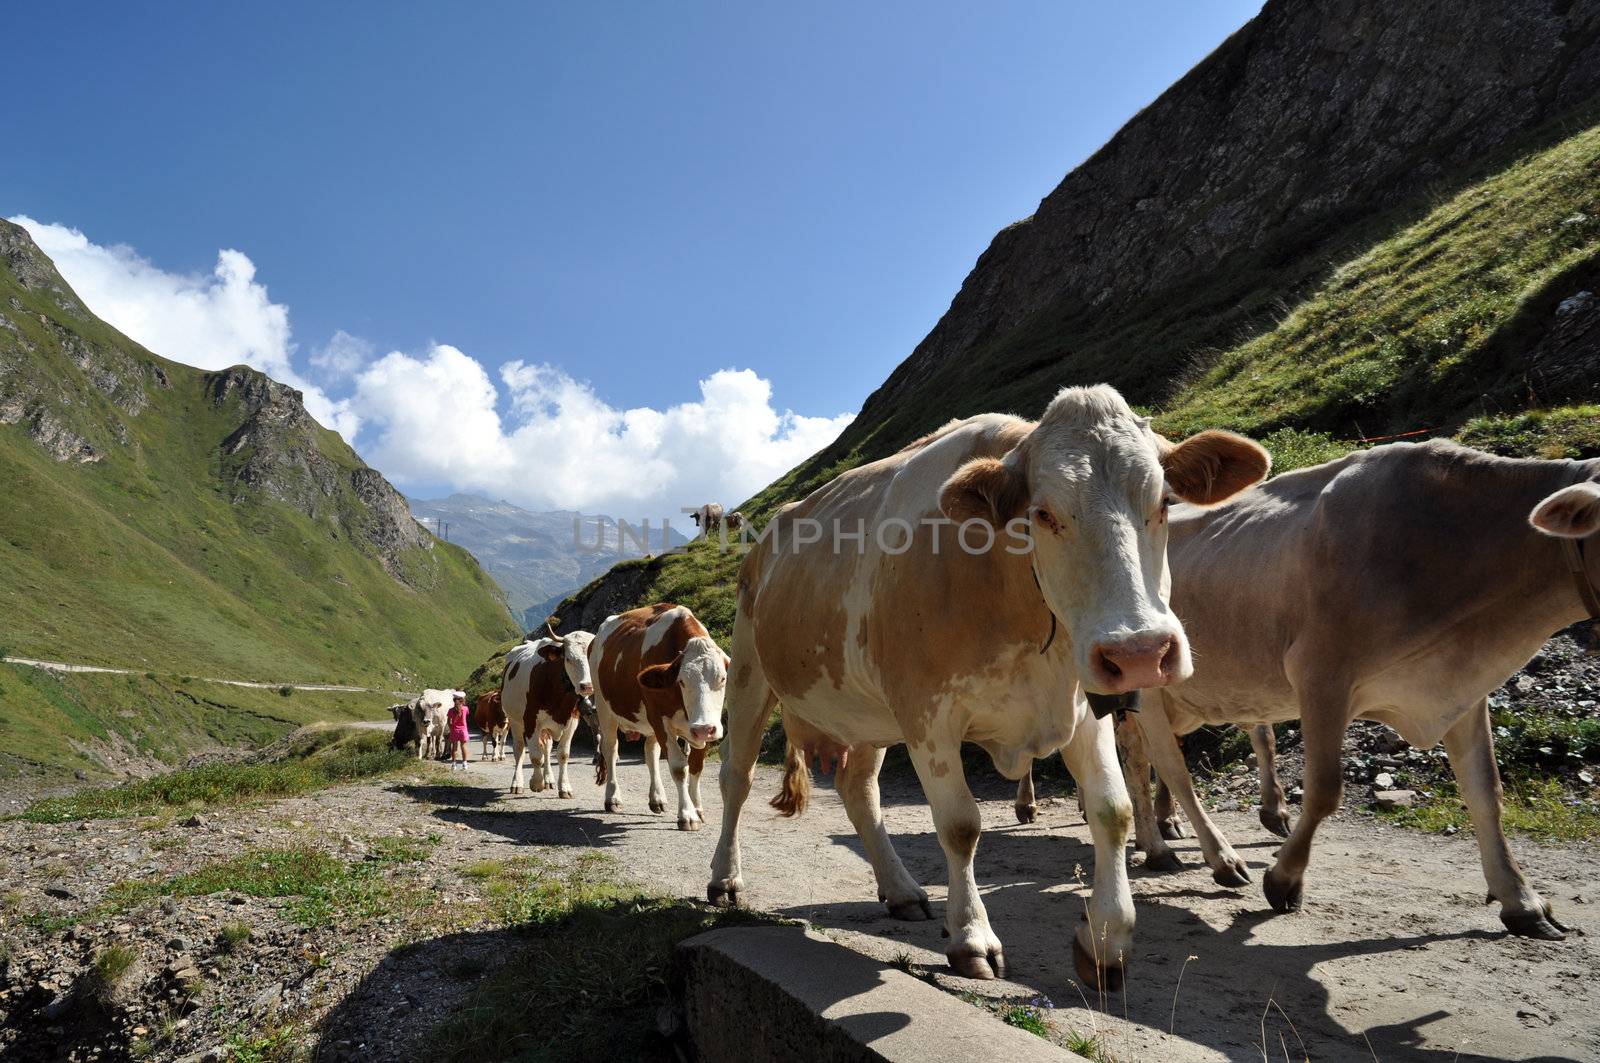 Cows in high mountain alpine rough grazing, Val Formazza, Italy